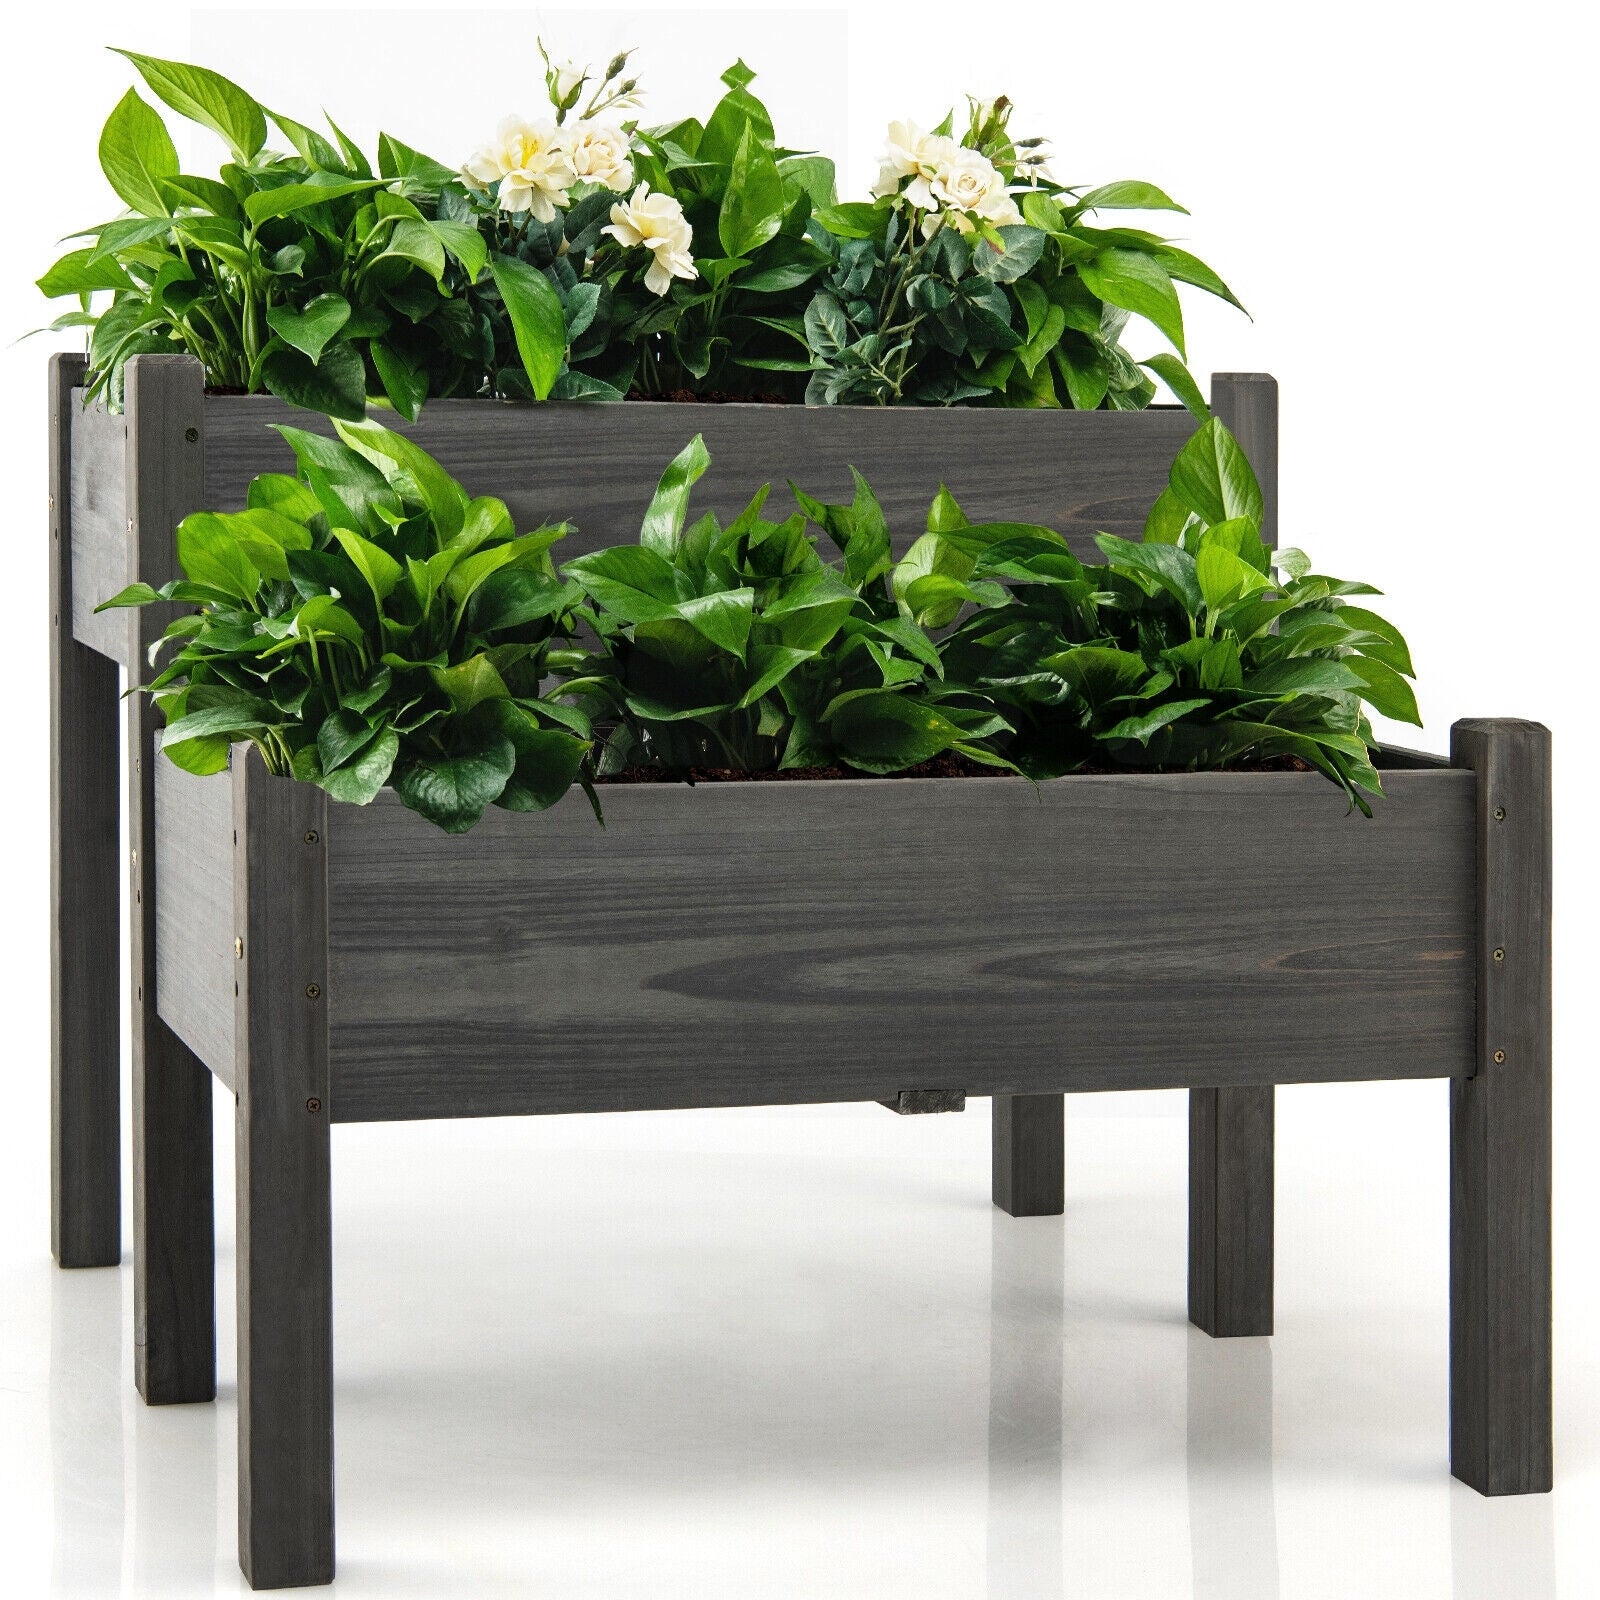 2 Tier Wooden Raised Garden Bed with Legs Drain Holes, Gray - Gallery Canada